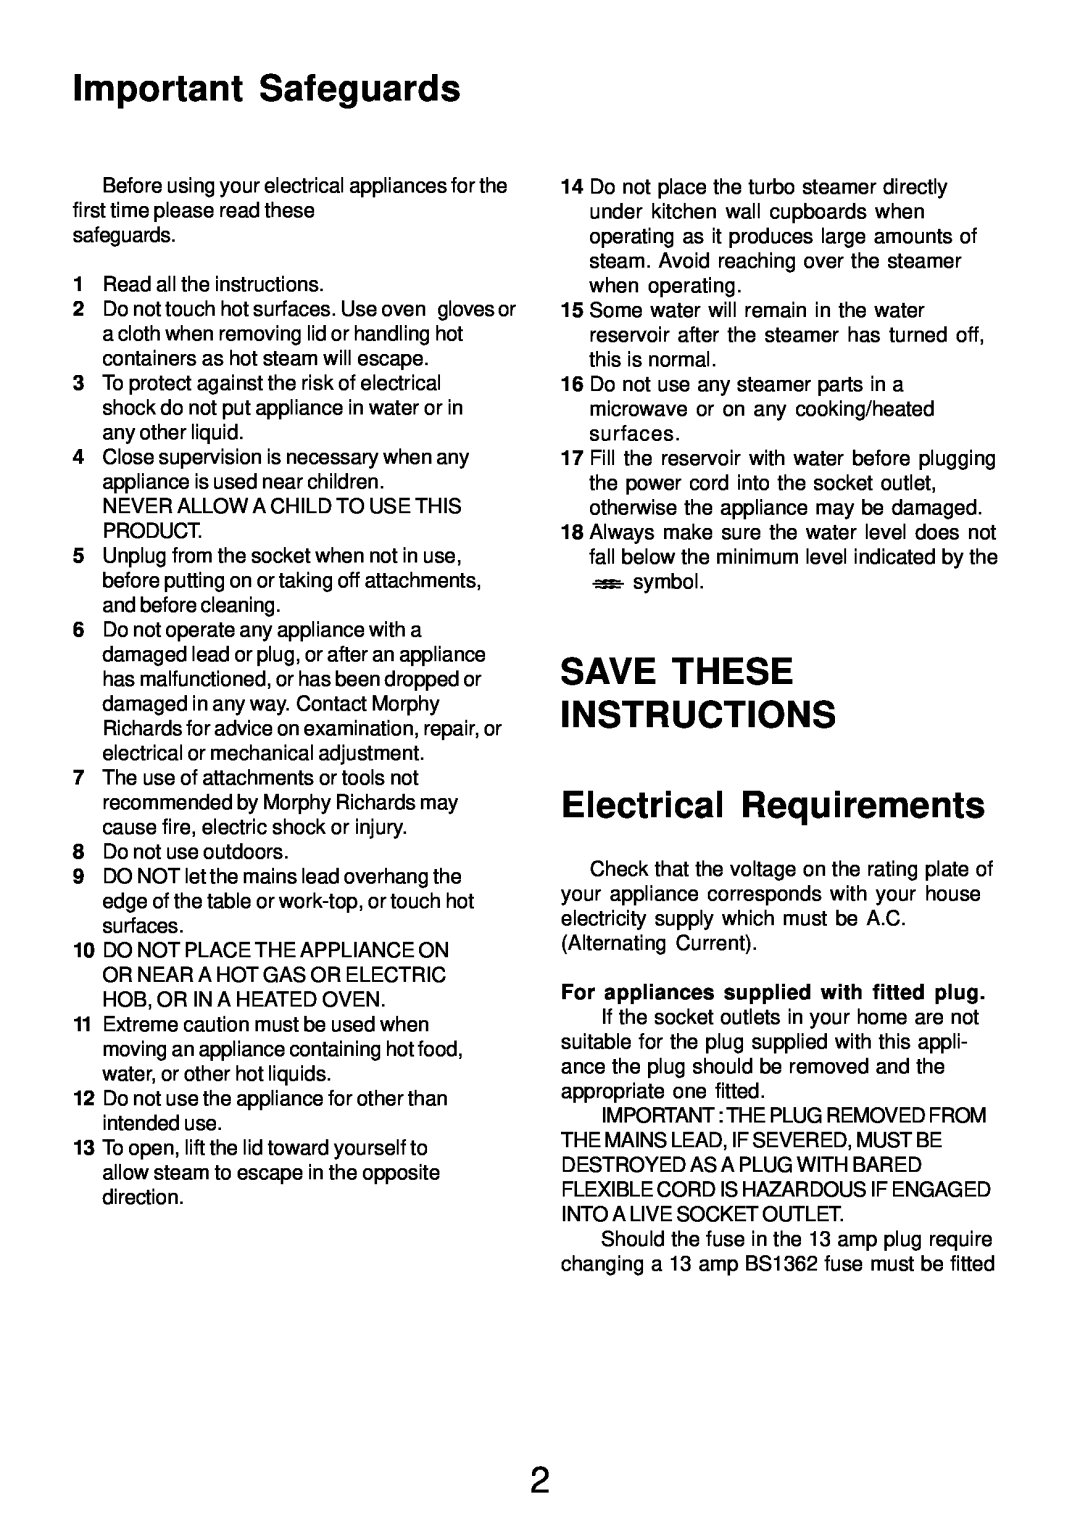 Morphy Richards Electric Steamer manual Important Safeguards, SAVE THESE INSTRUCTIONS Electrical Requirements 